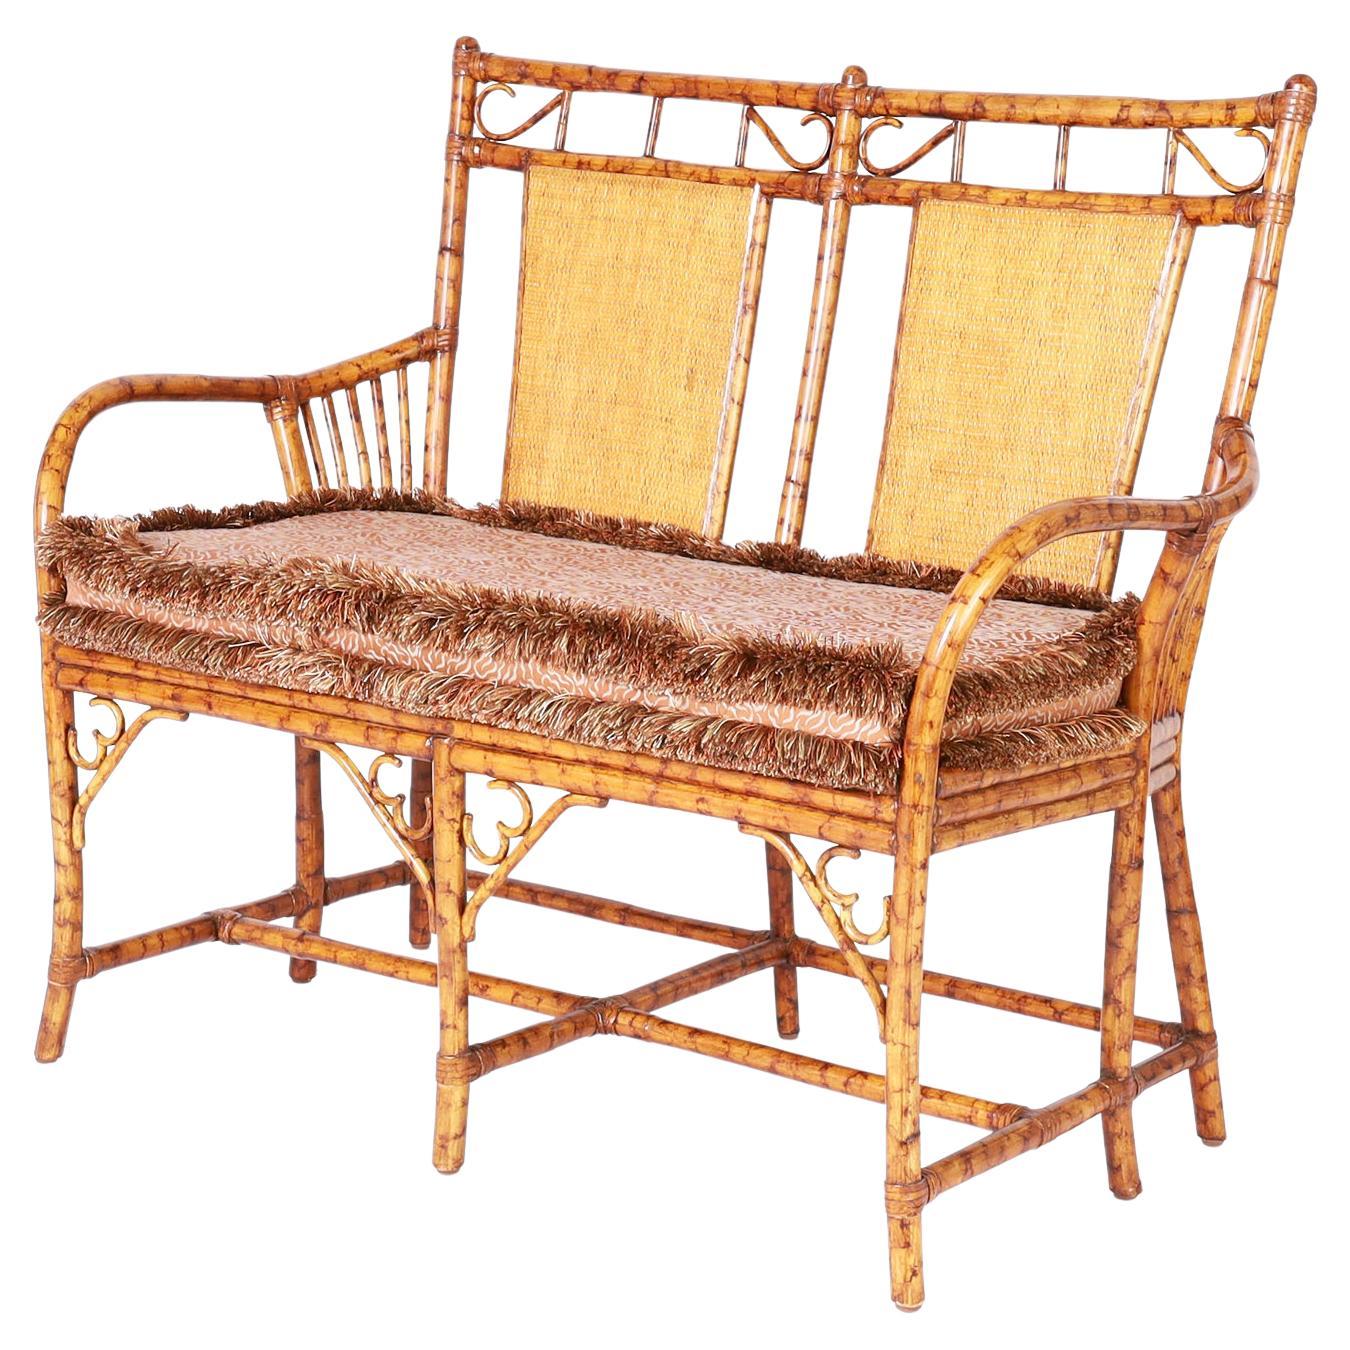 British Colonial Style Faux Bamboo Loveseat or Settee